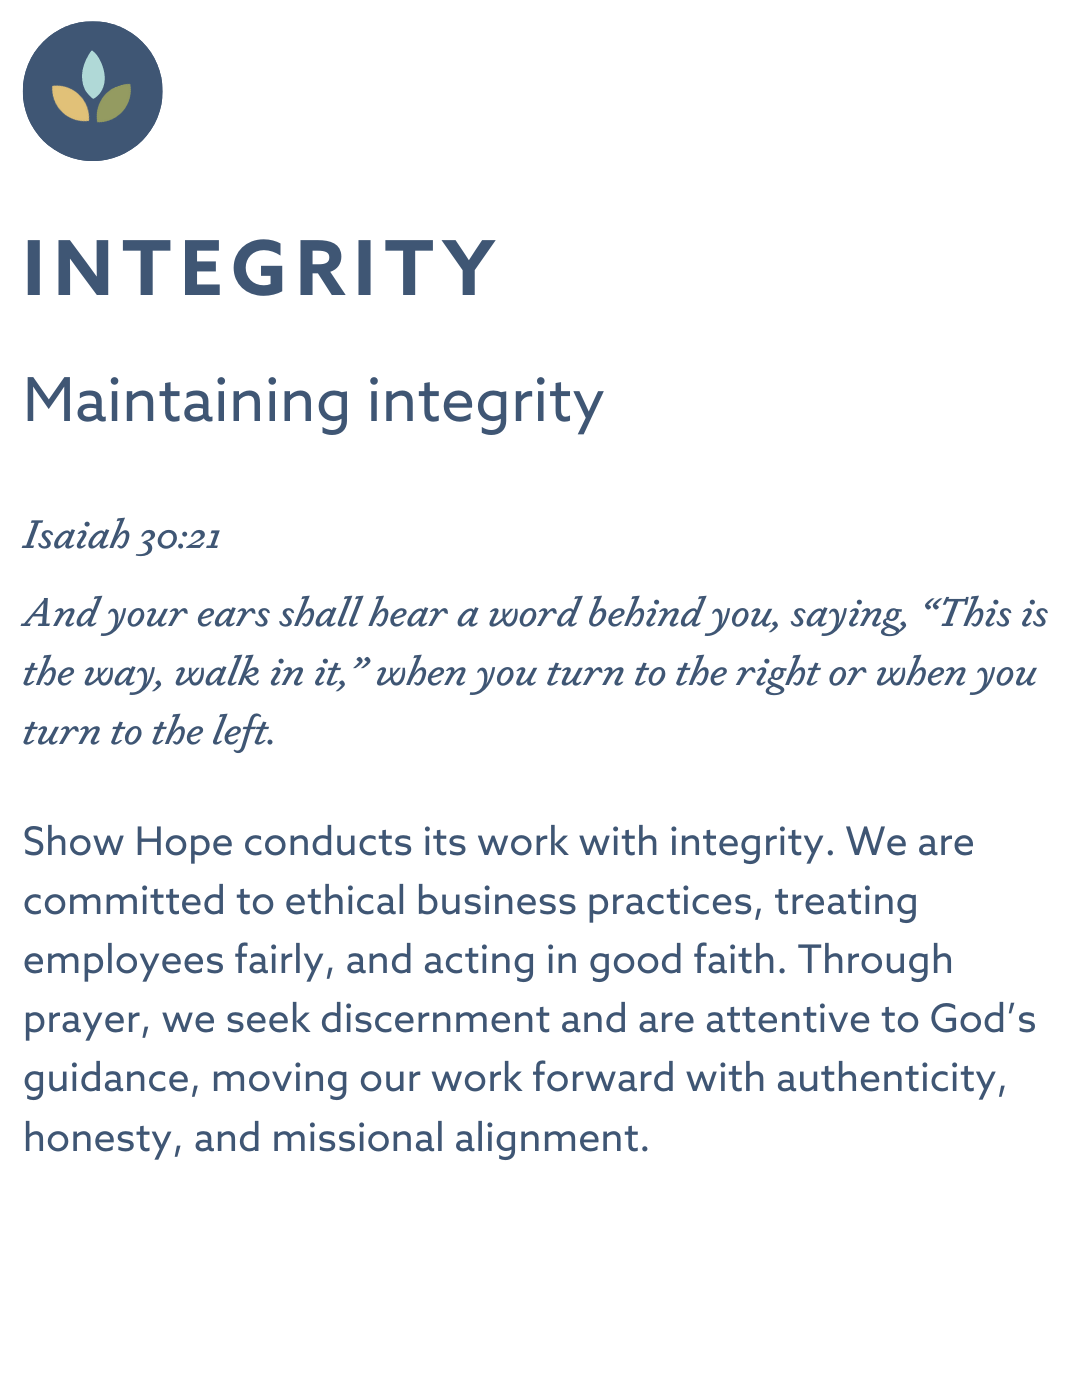 INTEGRITY Maintaining integrity Isaiah 30:21 “And your ears shall hear a word behind you, saying, ‘This is the way, walk in it,’ when you turn to the right or when you turn to the left.” Show Hope conducts its work with integrity. We are committed to ethical business practices, treating employees fairly, and acting in good faith. Through prayer, we seek discernment and are attentive to God’s guidance, moving our work forward with authenticity, honesty, and missional alignment.